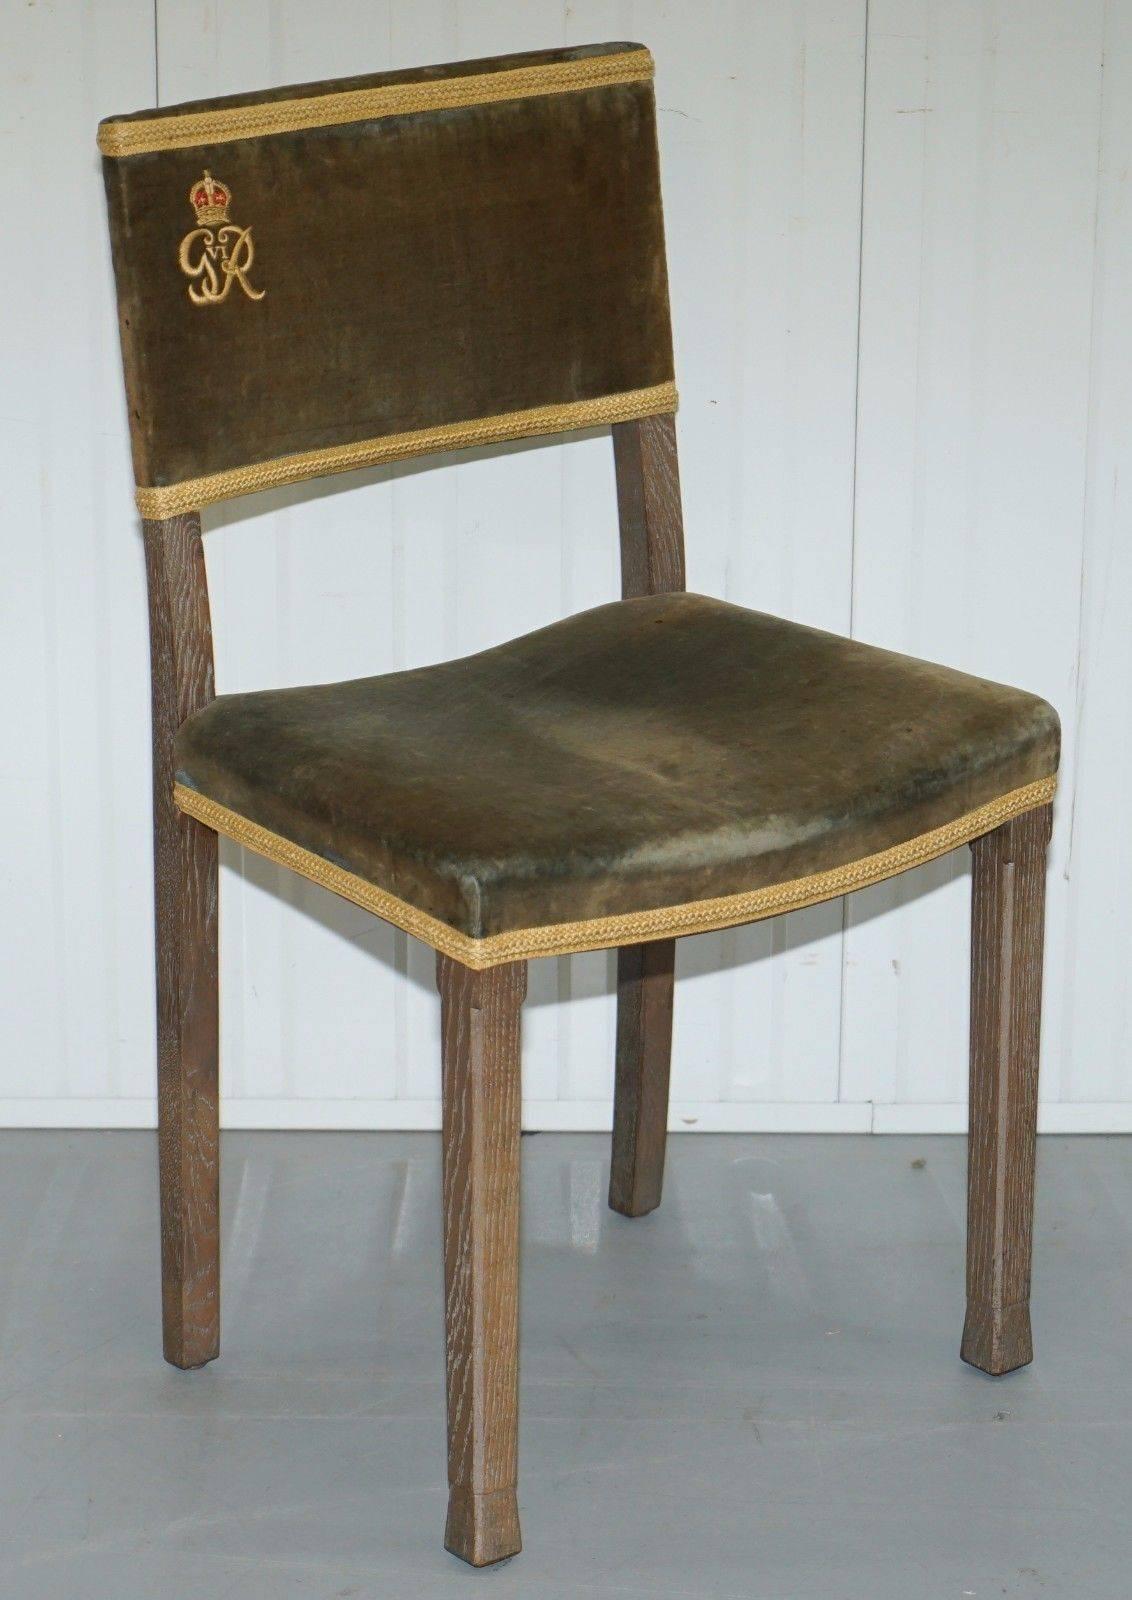 Wimbledon-Furniture

Wimbledon-Furniture is delighted to offer for sale this exceptionally rare 1937 King George VI Coronation chair and stool, both fully stamped original Westminster Abby pieces

These are the only pieces on the market for sale